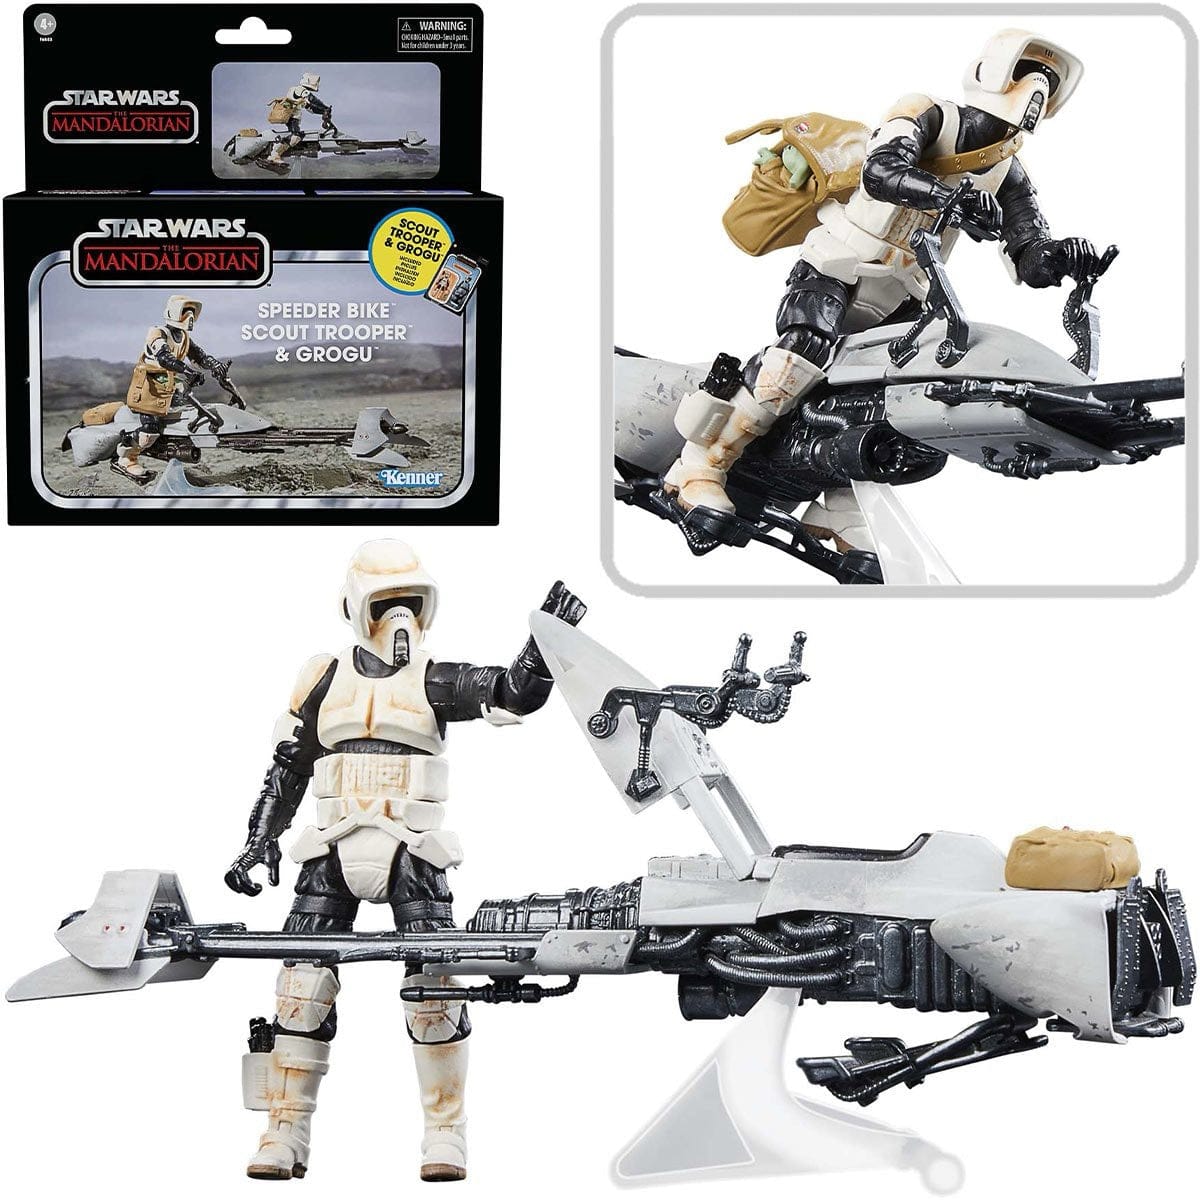 Hasbro Star Wars The Vintage Collection The Mandalorian Speeder Bike with Scout Trooper & Grogu